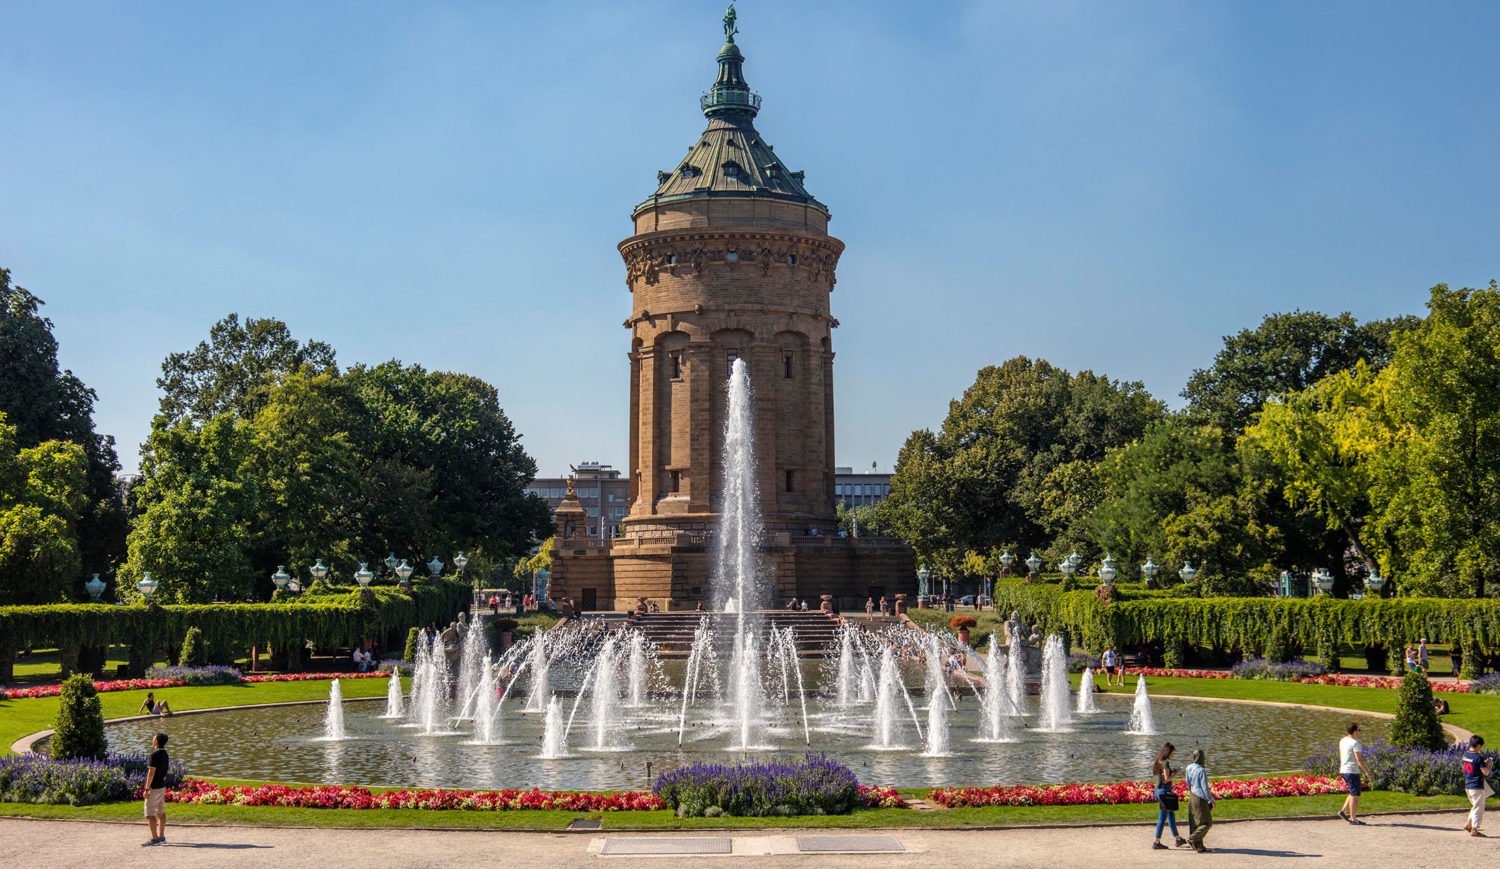 The old water tower with the surrounding parks is part of the largest contiguous Art Nouveau complex in Germany